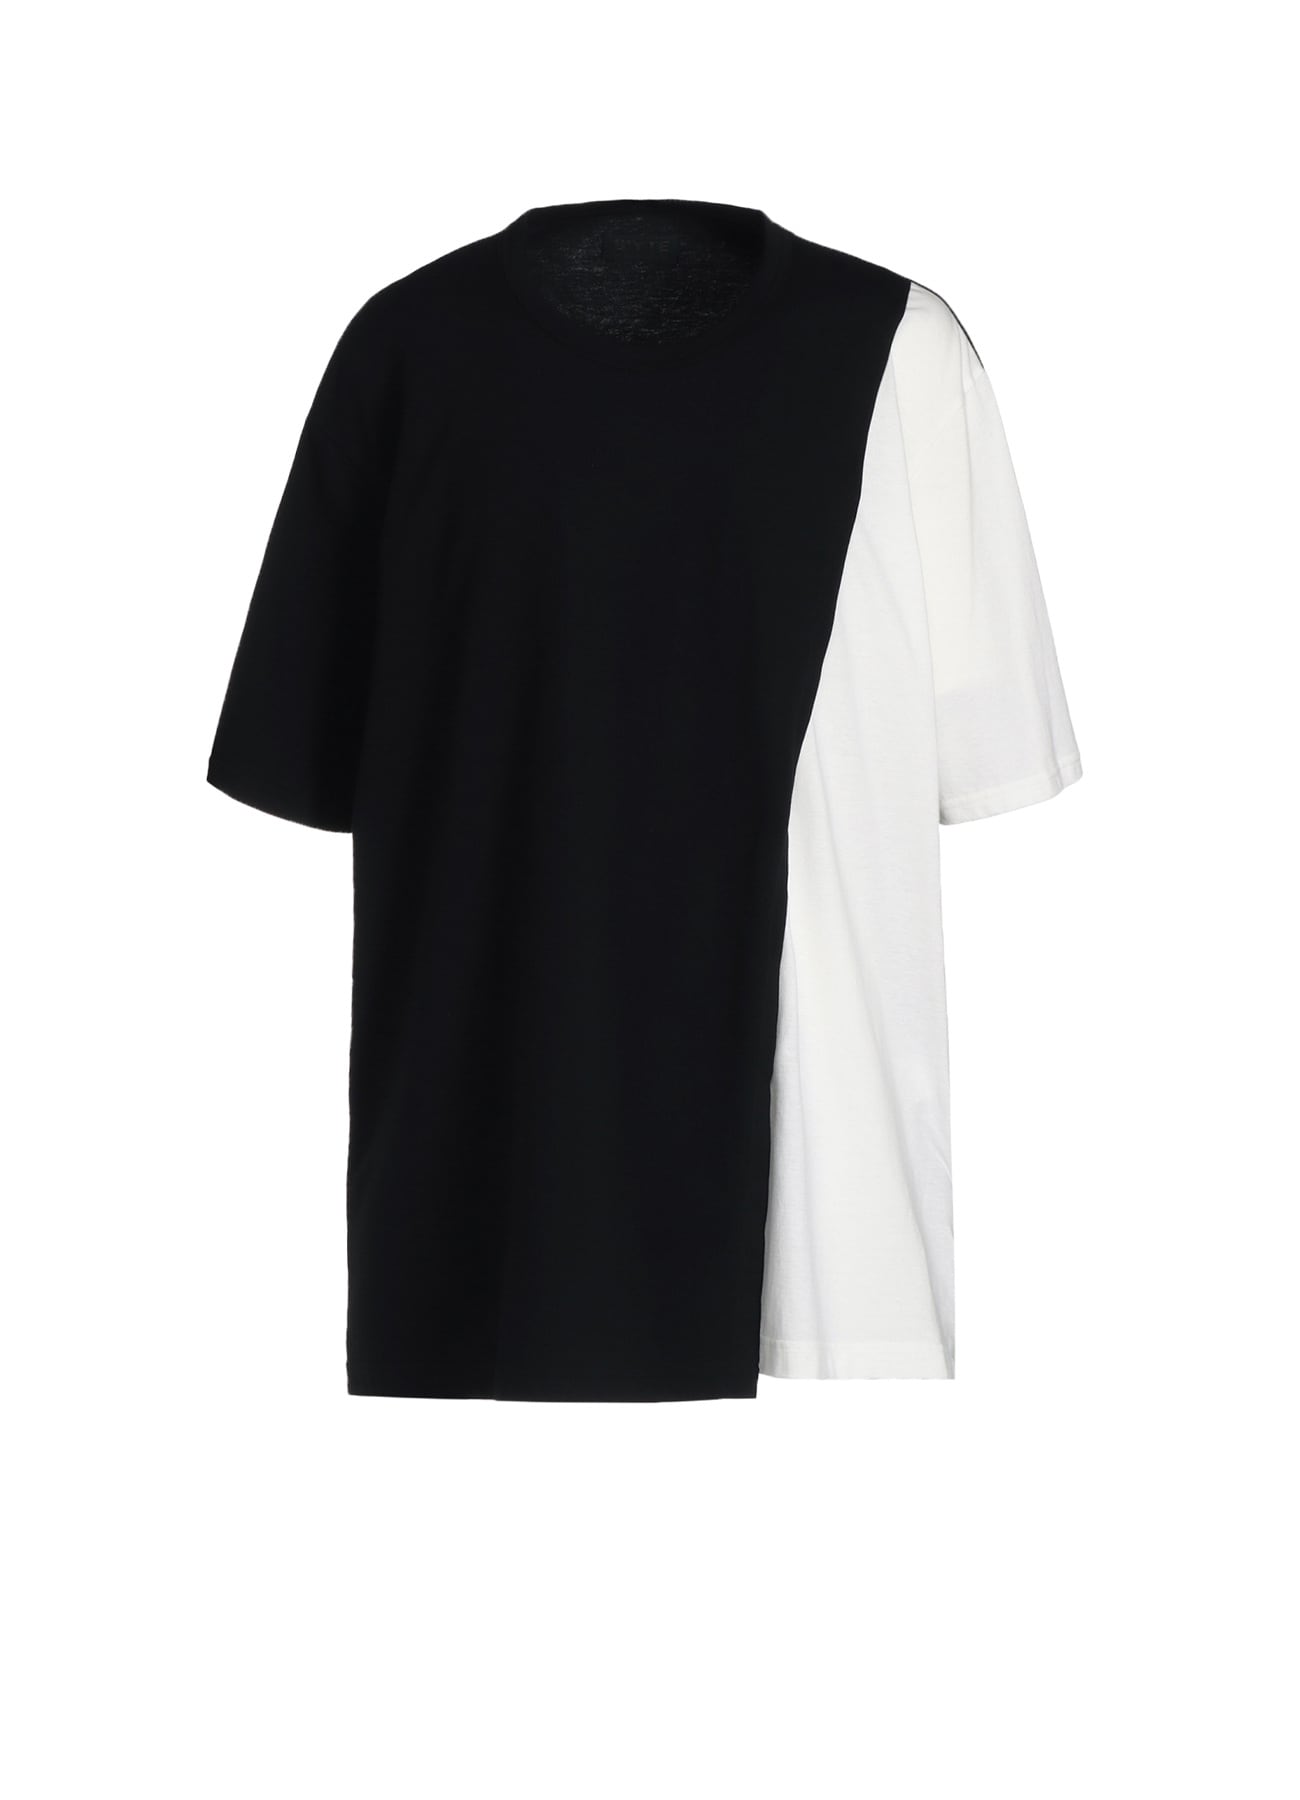 【5/23～5/28 Y's OMOTESANDO 先行販売】COLOR-SWITCHED LAYERED T-SHIRT